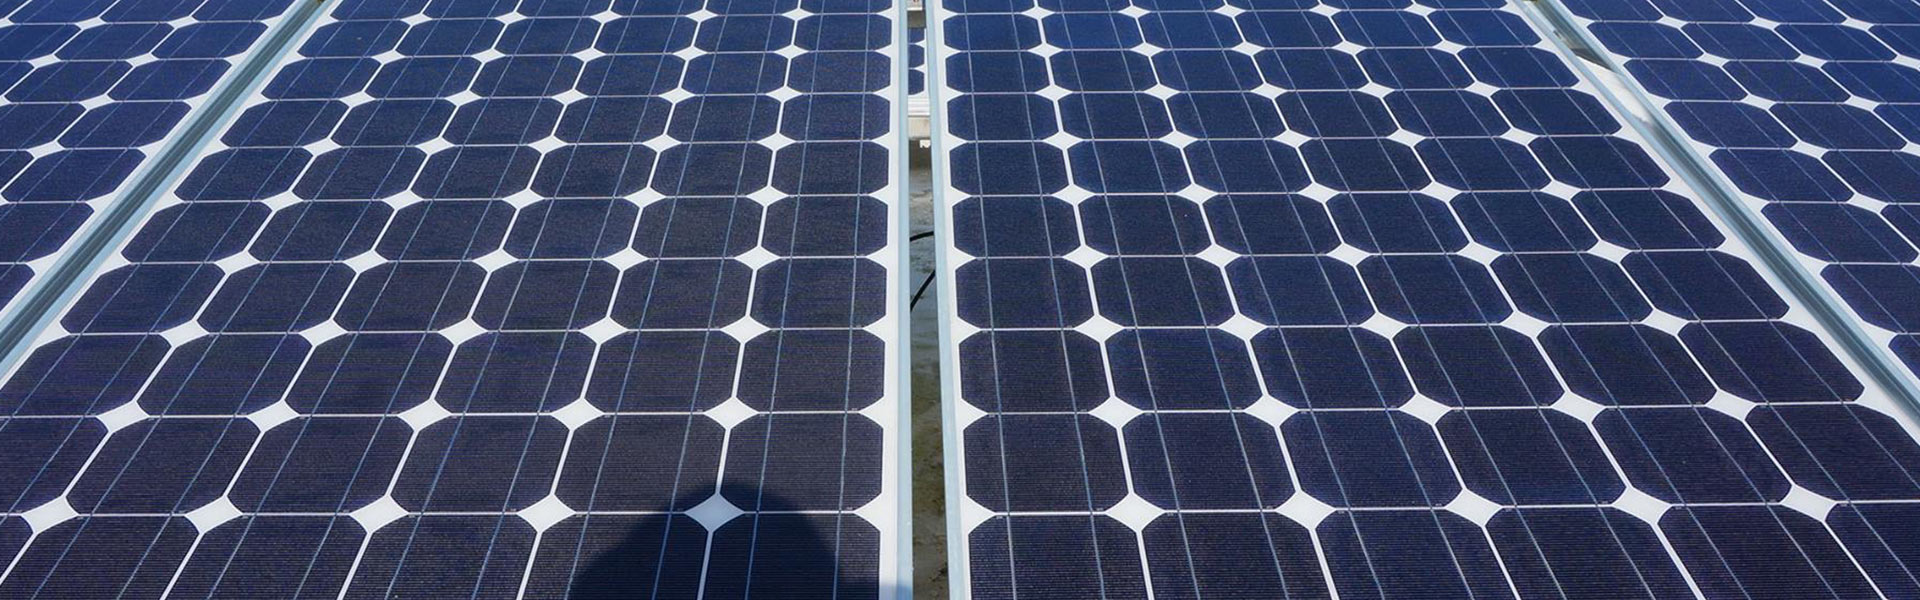 glass-science-solar-panels-protected